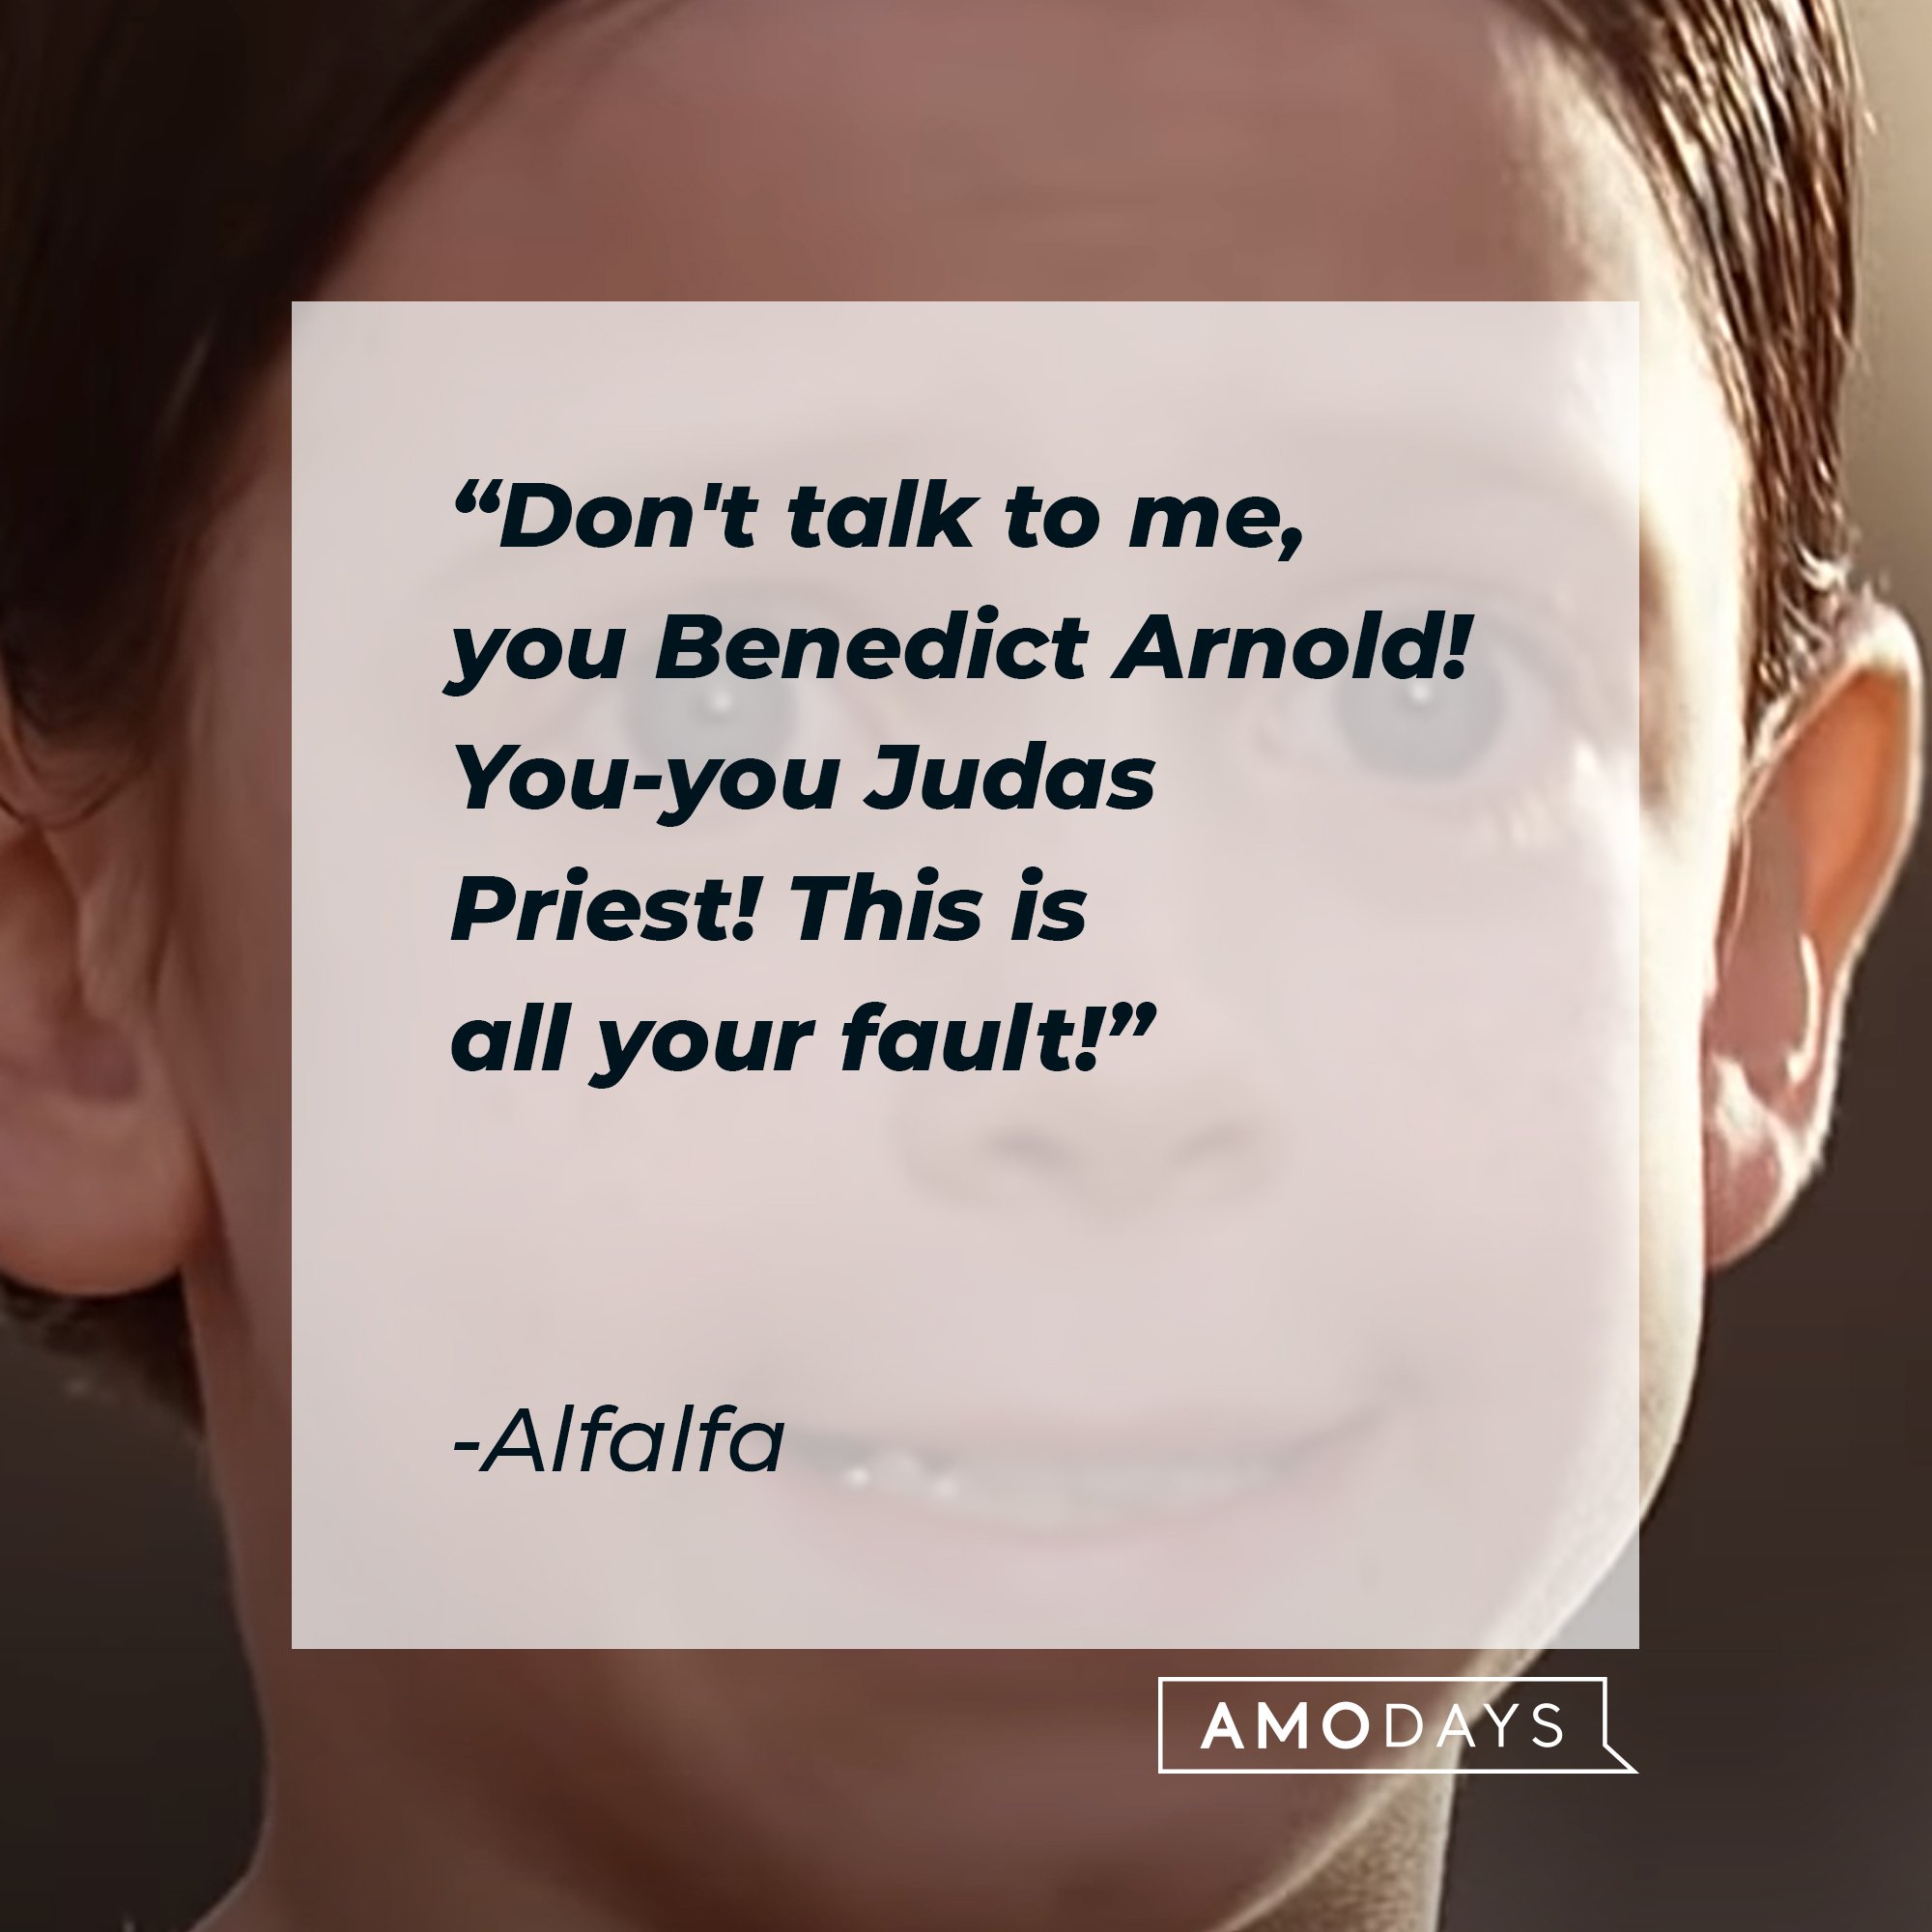 Alfalfa’s quote: "Don't talk to me, you Benedict Arnold! You-you Judas Priest! This is all your fault!" | Image: AmoDays